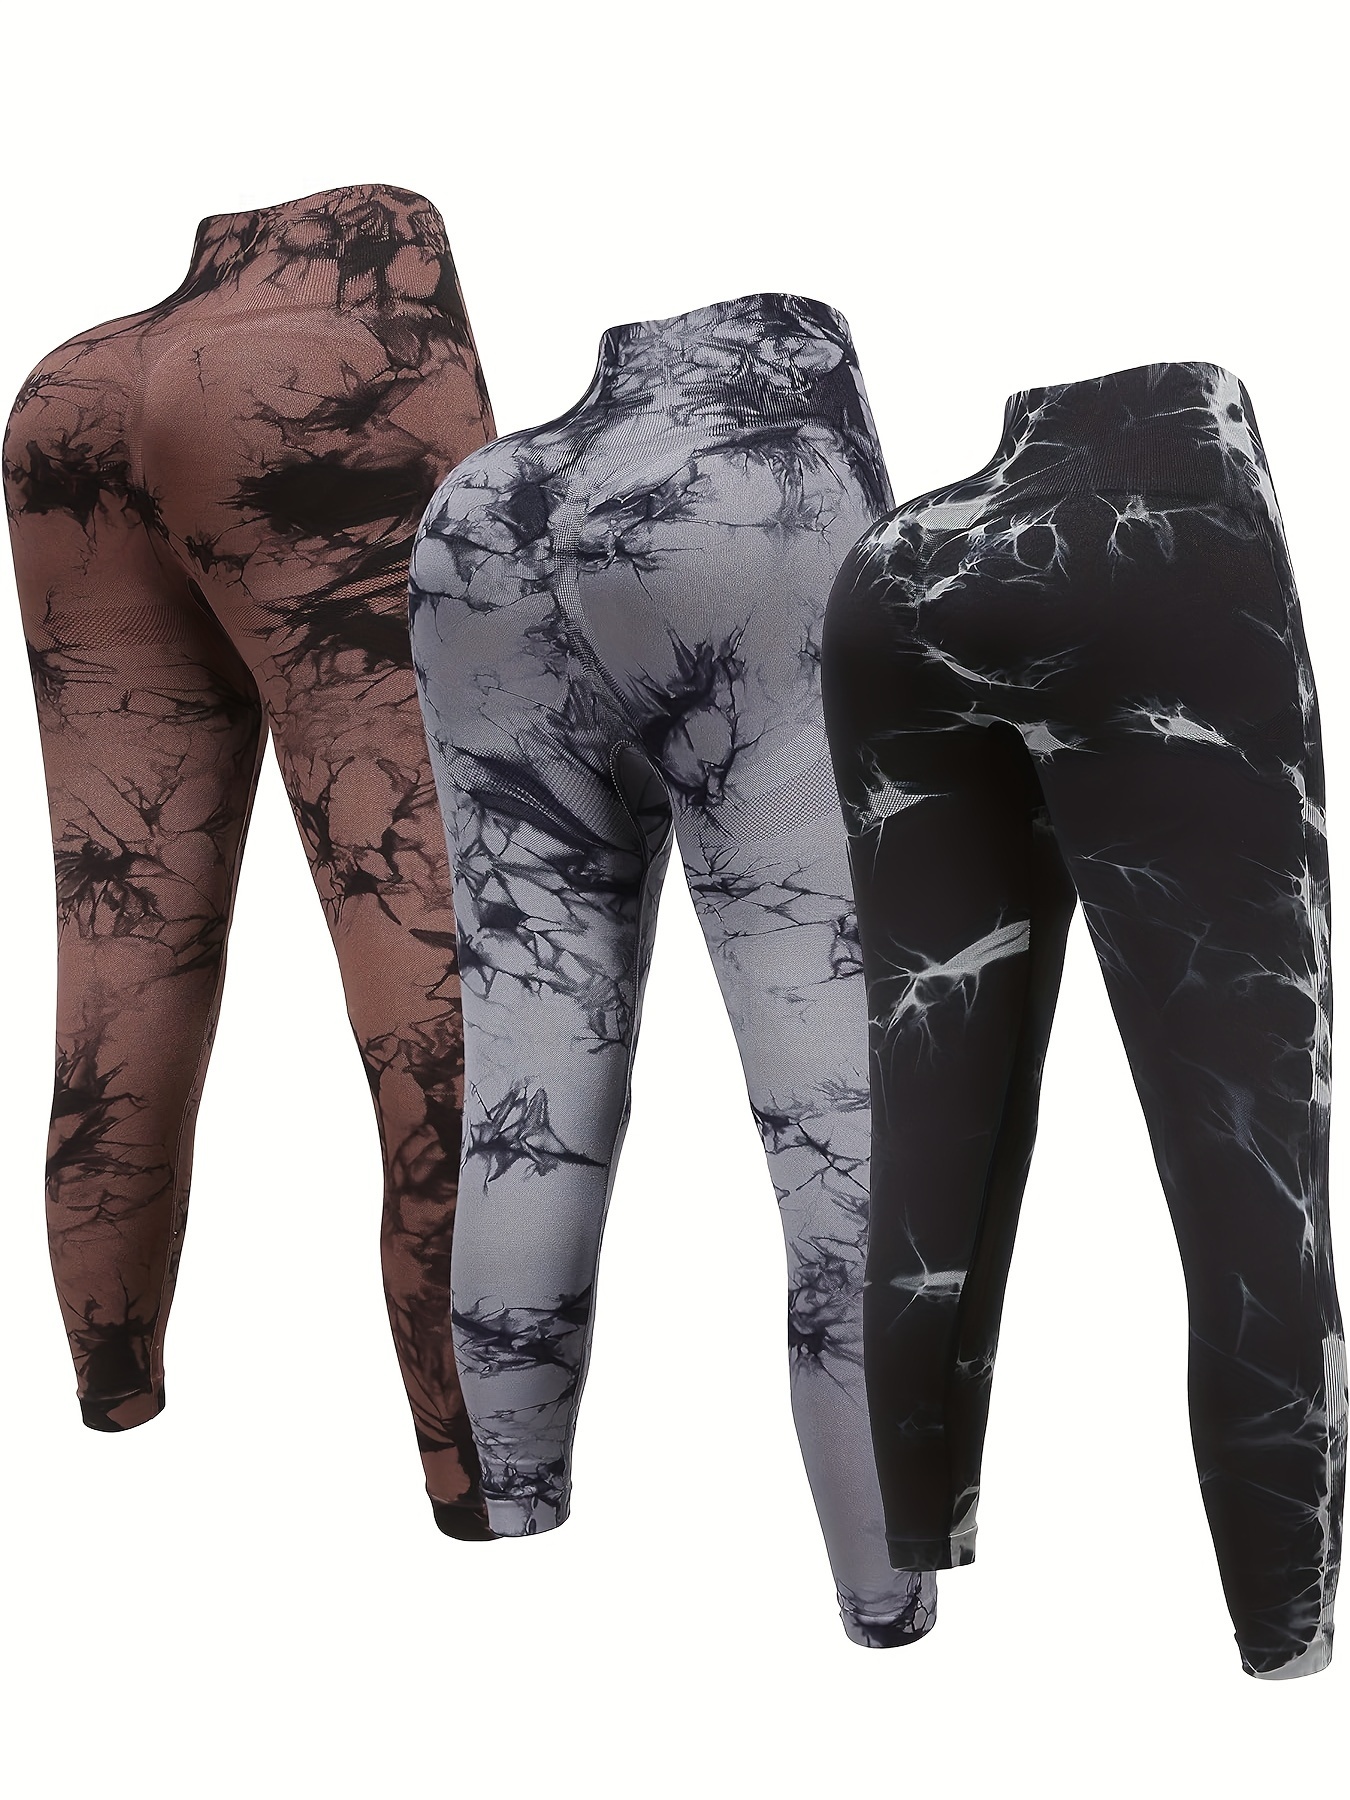 Seamless High Waist Tie Dye Adapt Camo Seamless Leggings For Women Perfect  For Gym, Fitness, Yoga And Sports From Peacearth, $15